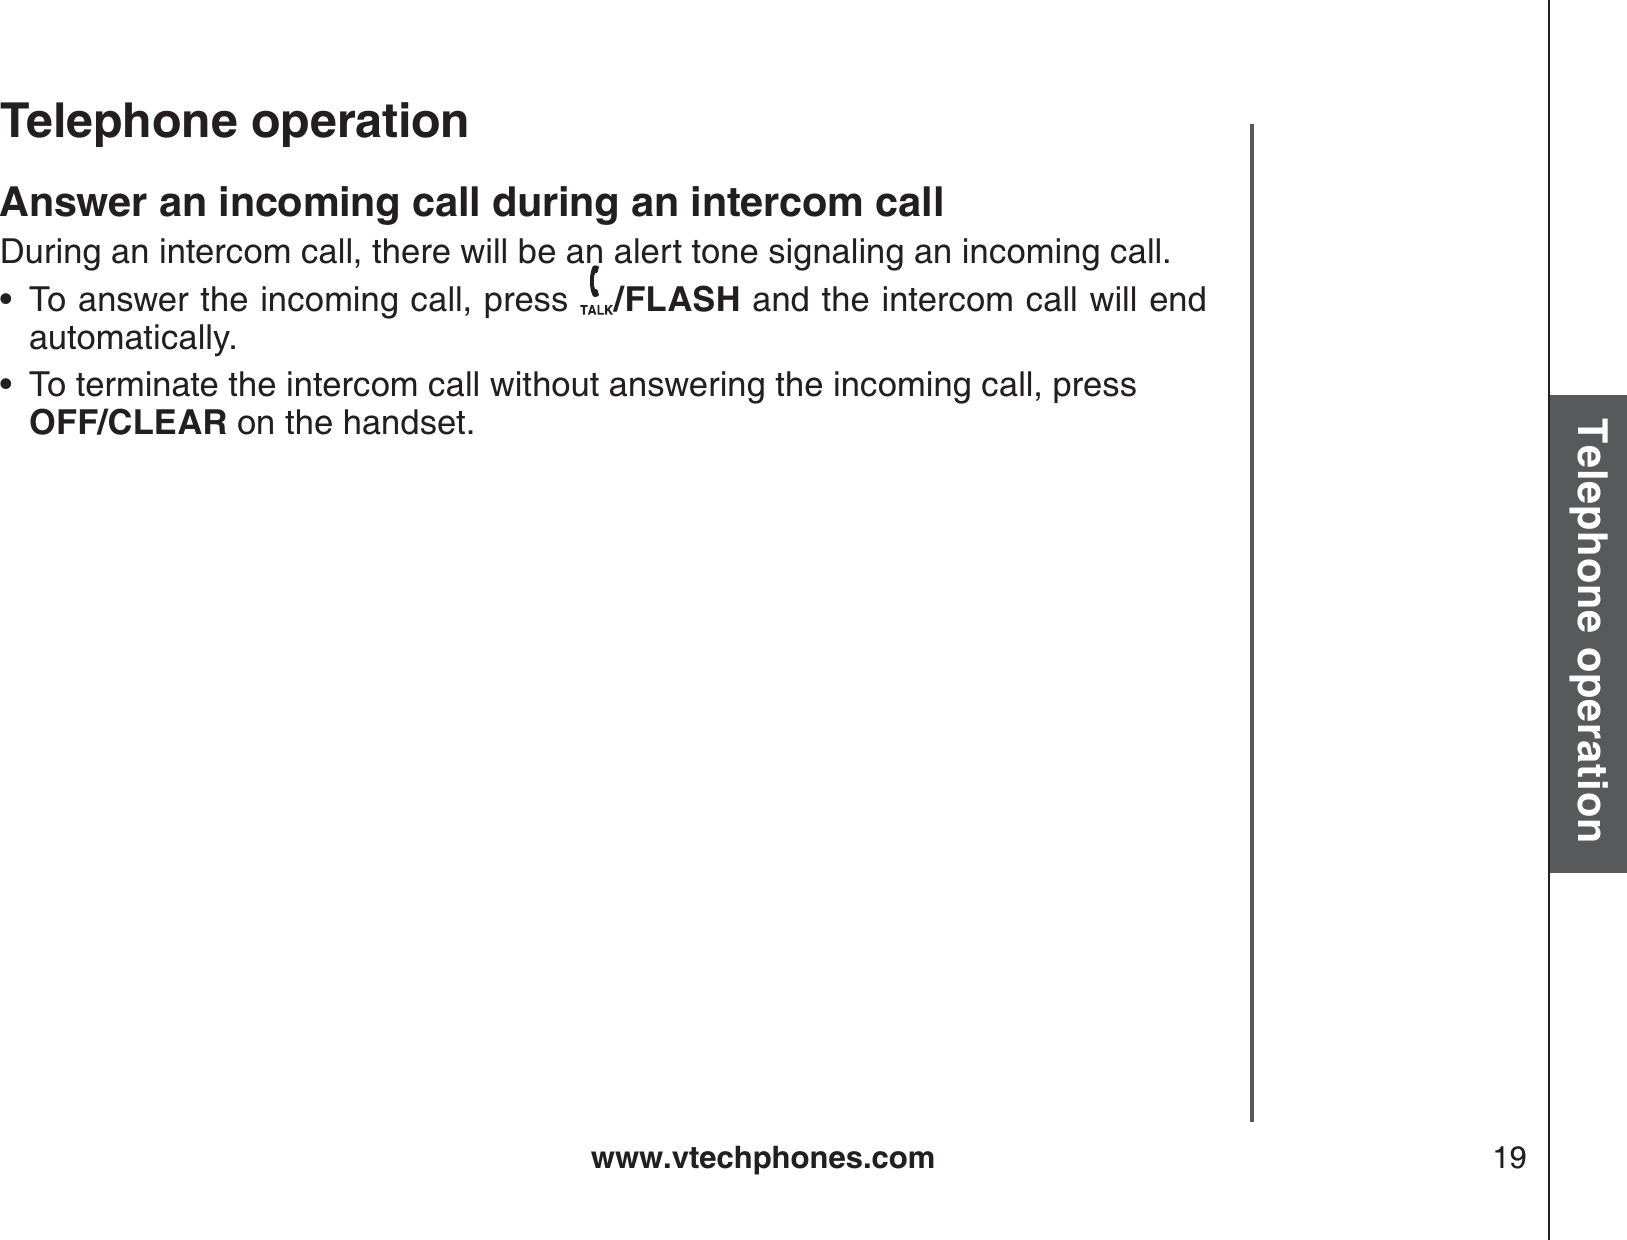 www.vtechphones.com 19Basic operationTelephone operationTelephone operationAnswer an incoming call during an intercom callDuring an intercom call, there will be an alert tone signaling an incoming call.To answer the incoming call, press  /FLASH and the intercom call will end automatically.To terminate the intercom call without answering the incoming call, press OFF/CLEAR on the handset.••